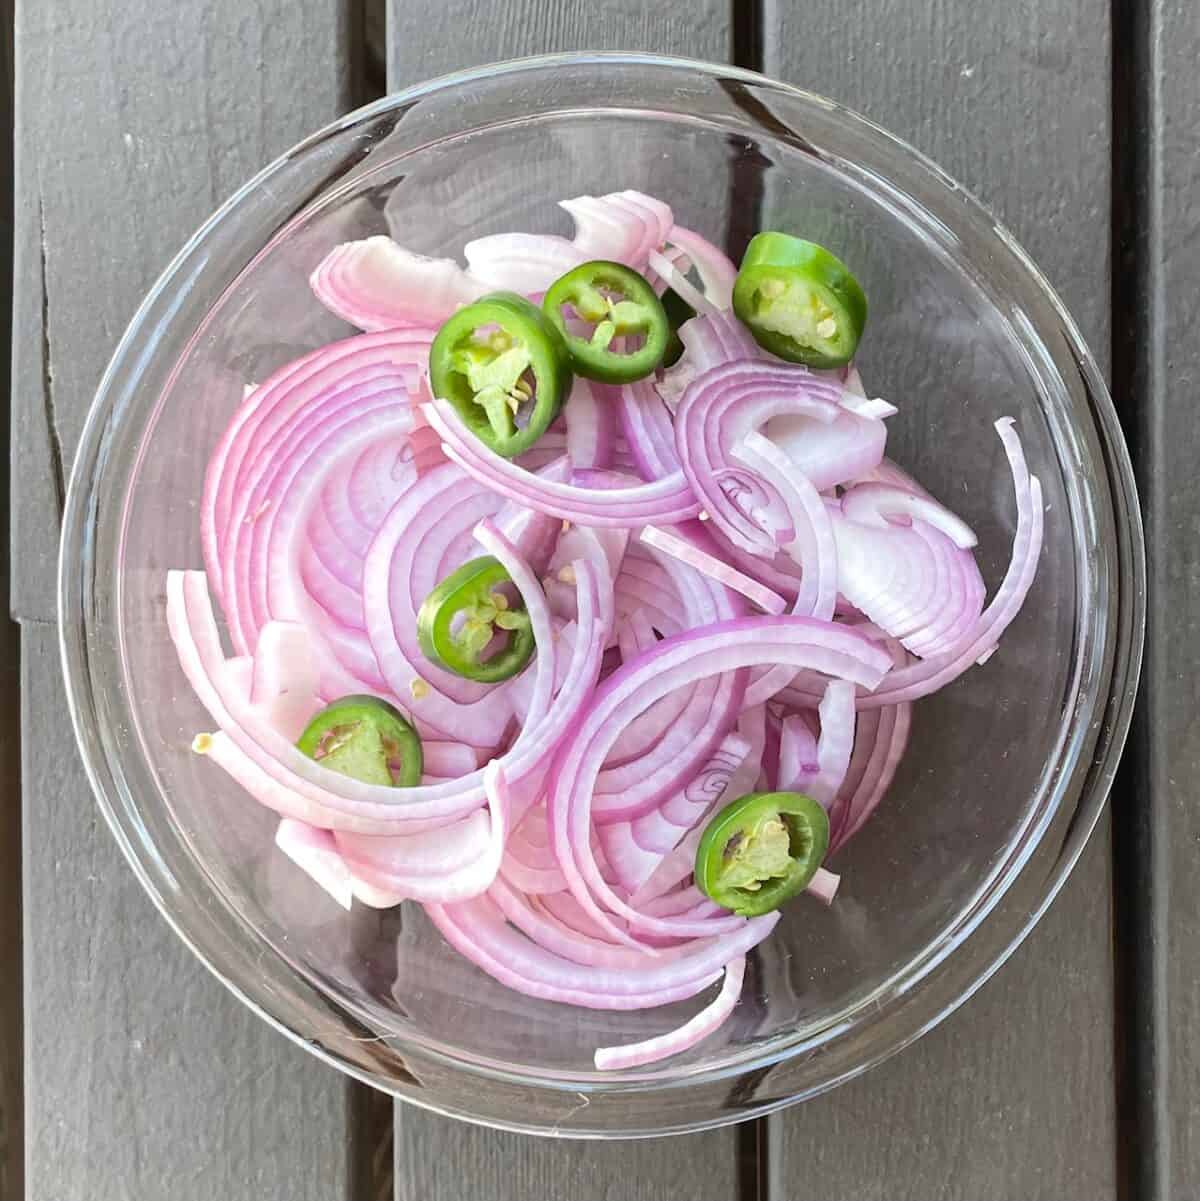 sliced red onion and jalapeno in a glass bowl.